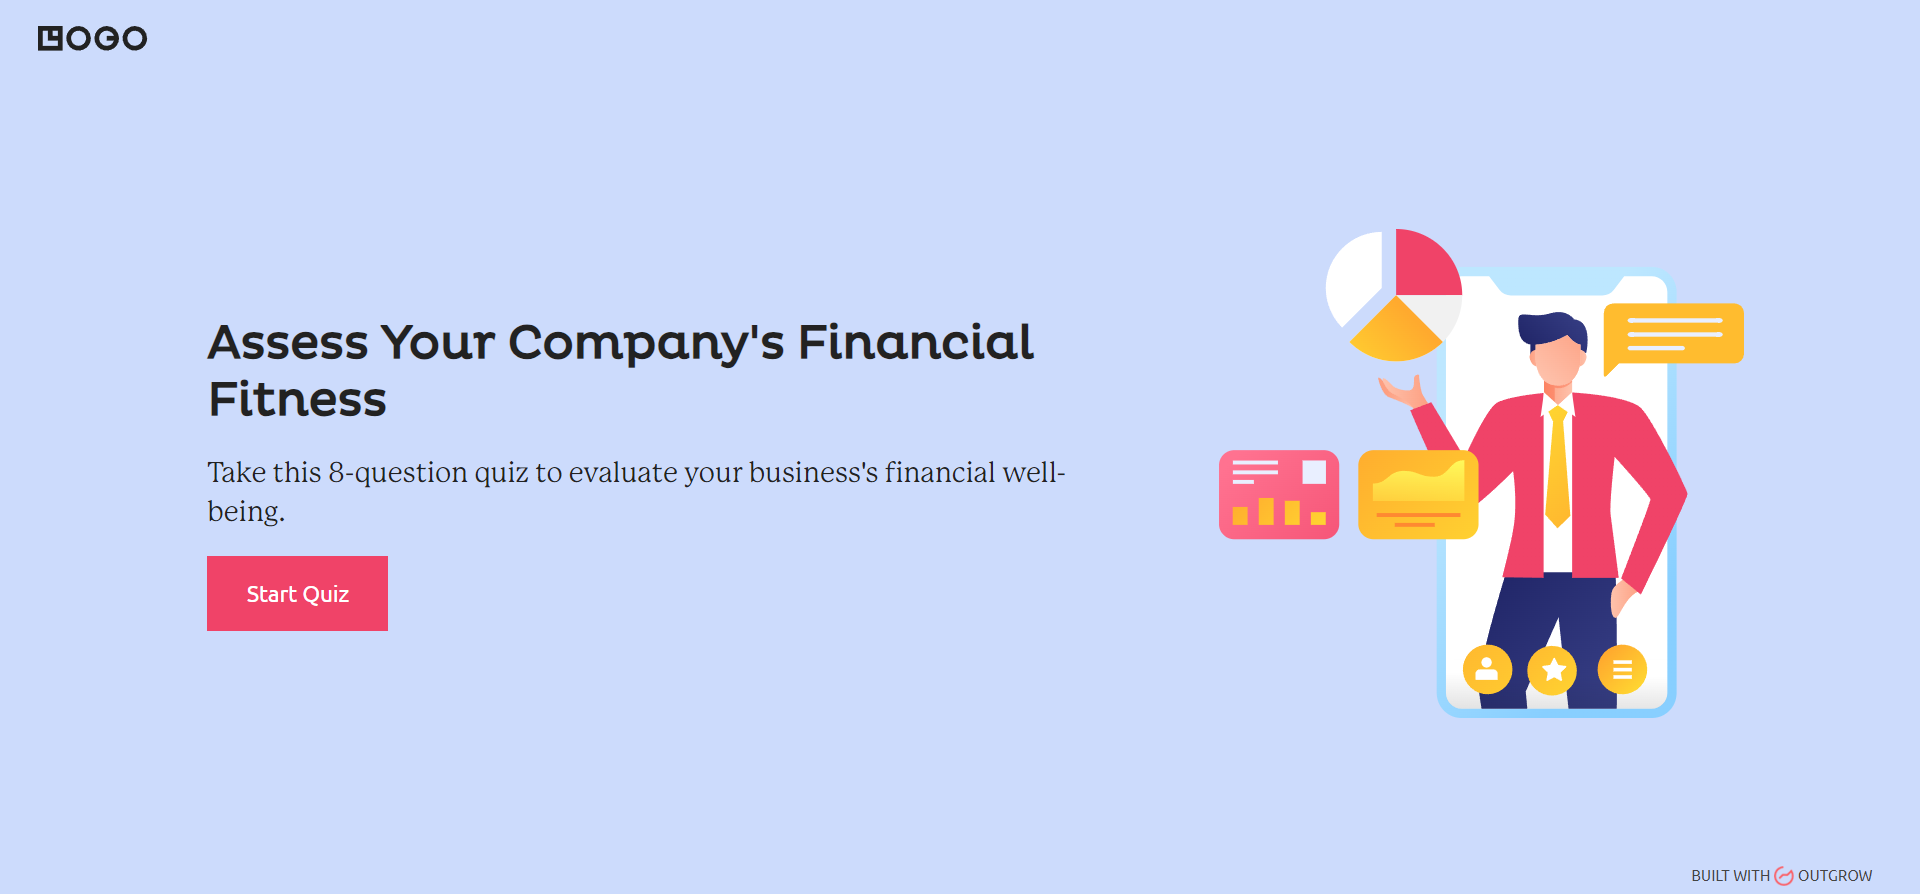 Assess Your Company's Financial Fitness